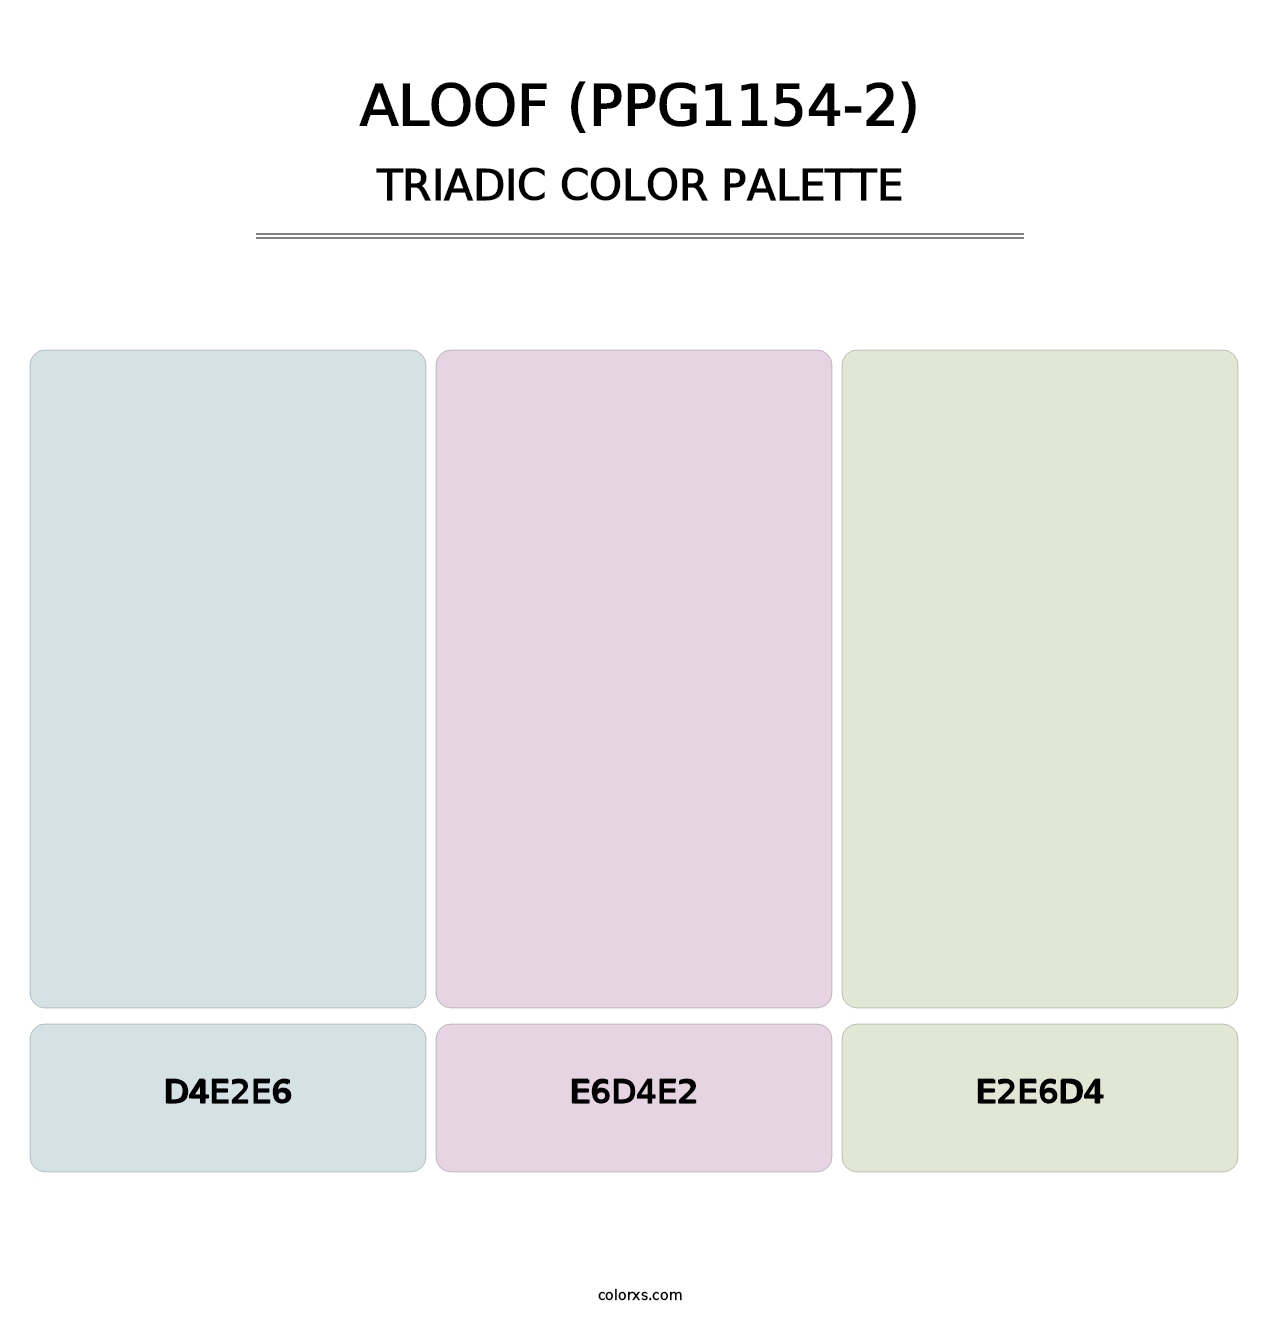 Aloof (PPG1154-2) - Triadic Color Palette